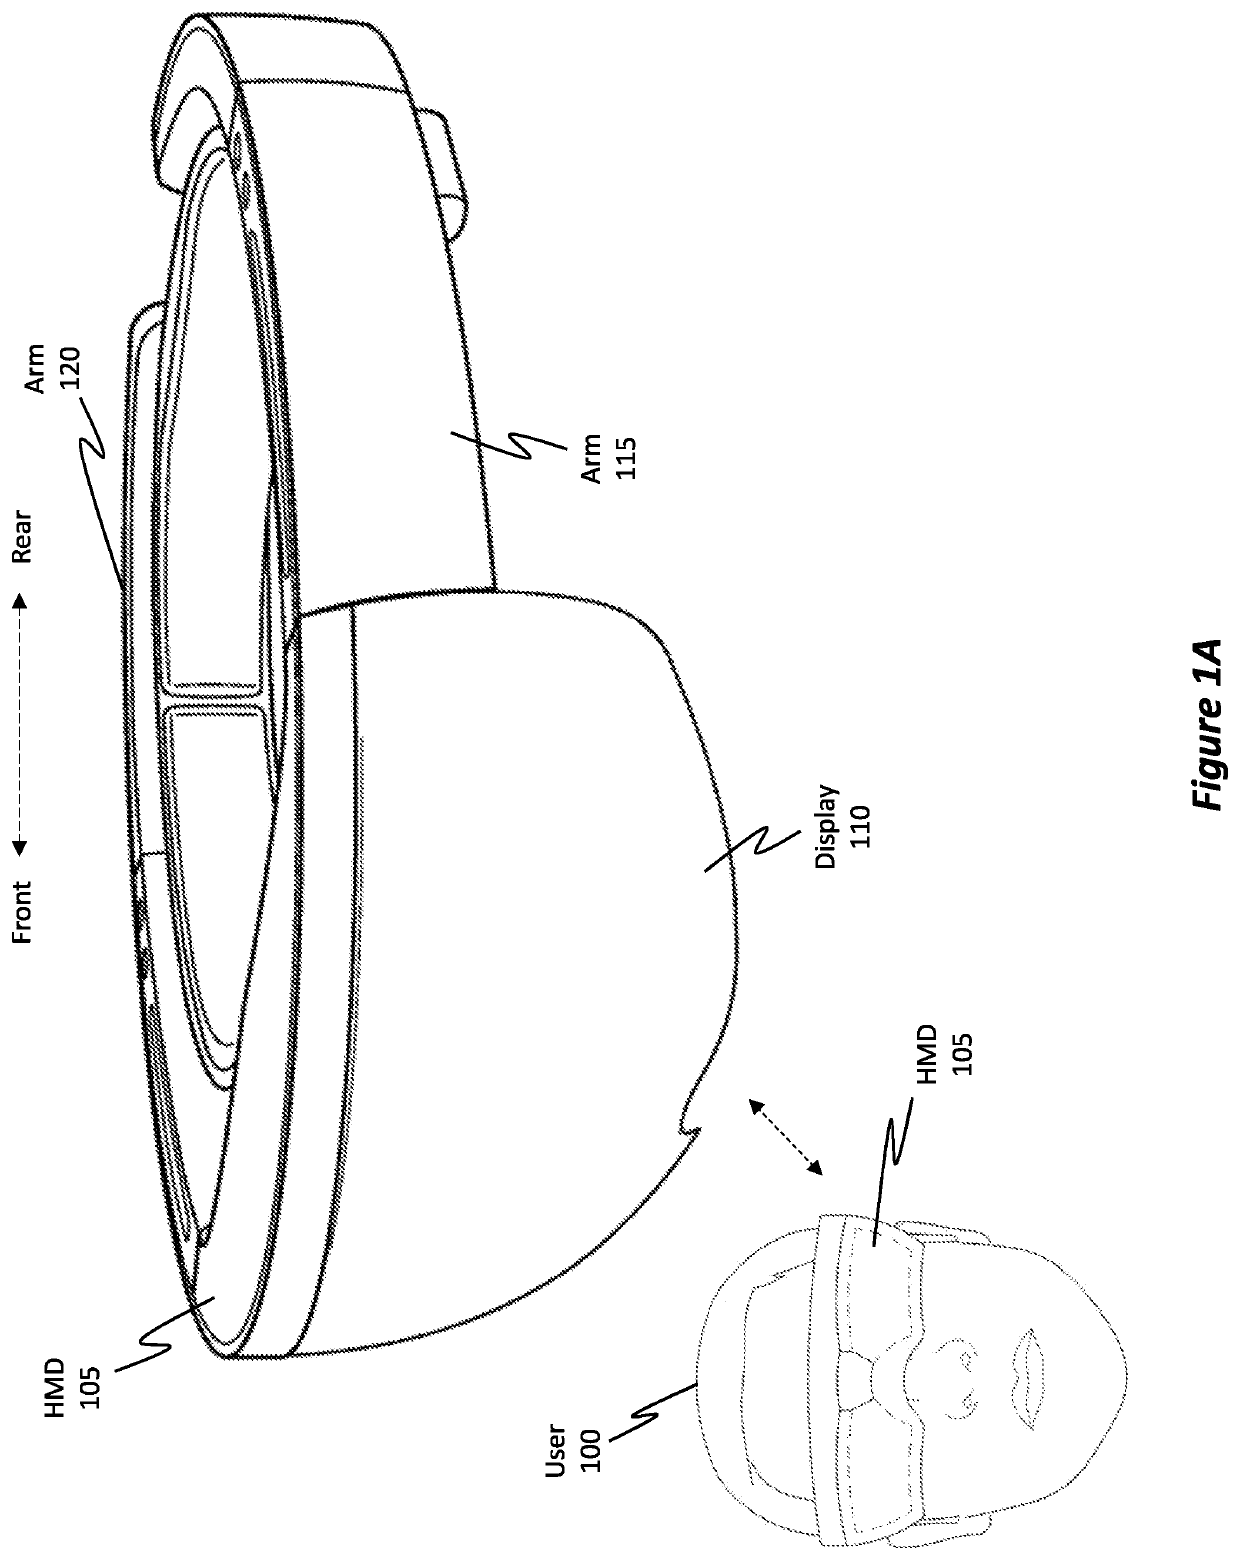 Conformable HMD with dynamically adjustable nested ribbon